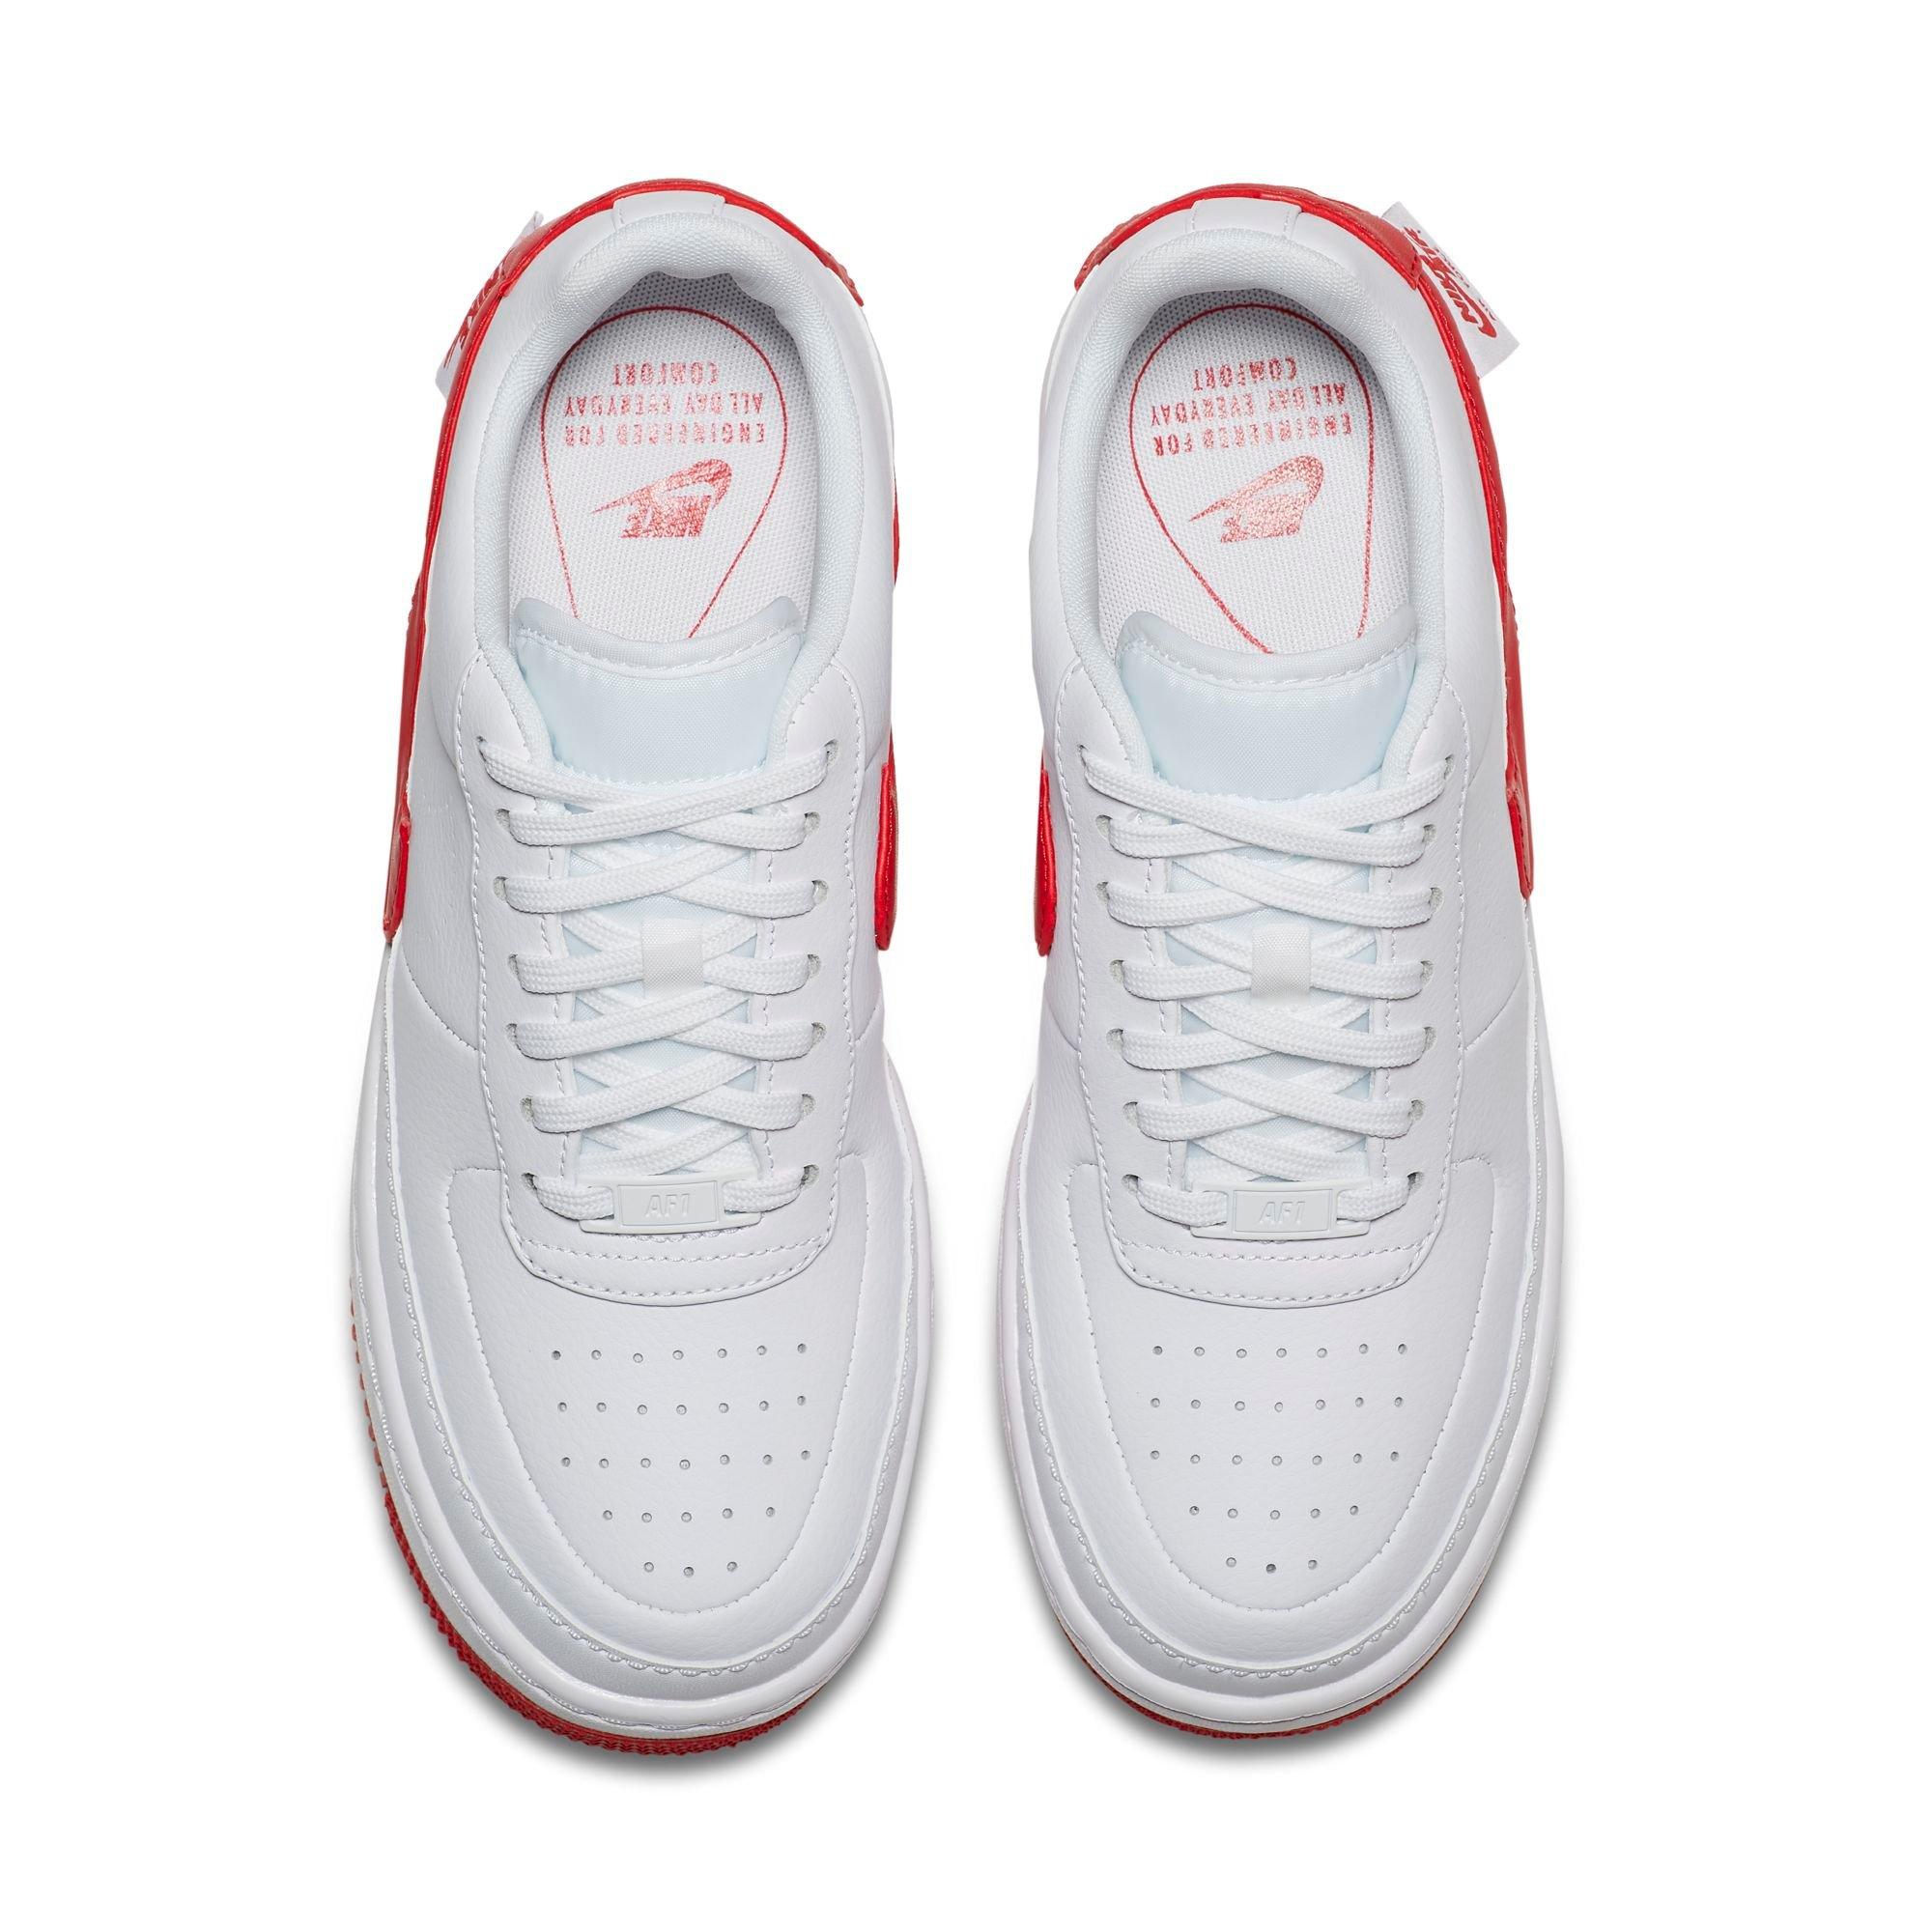 nike air force 1 jester women's red